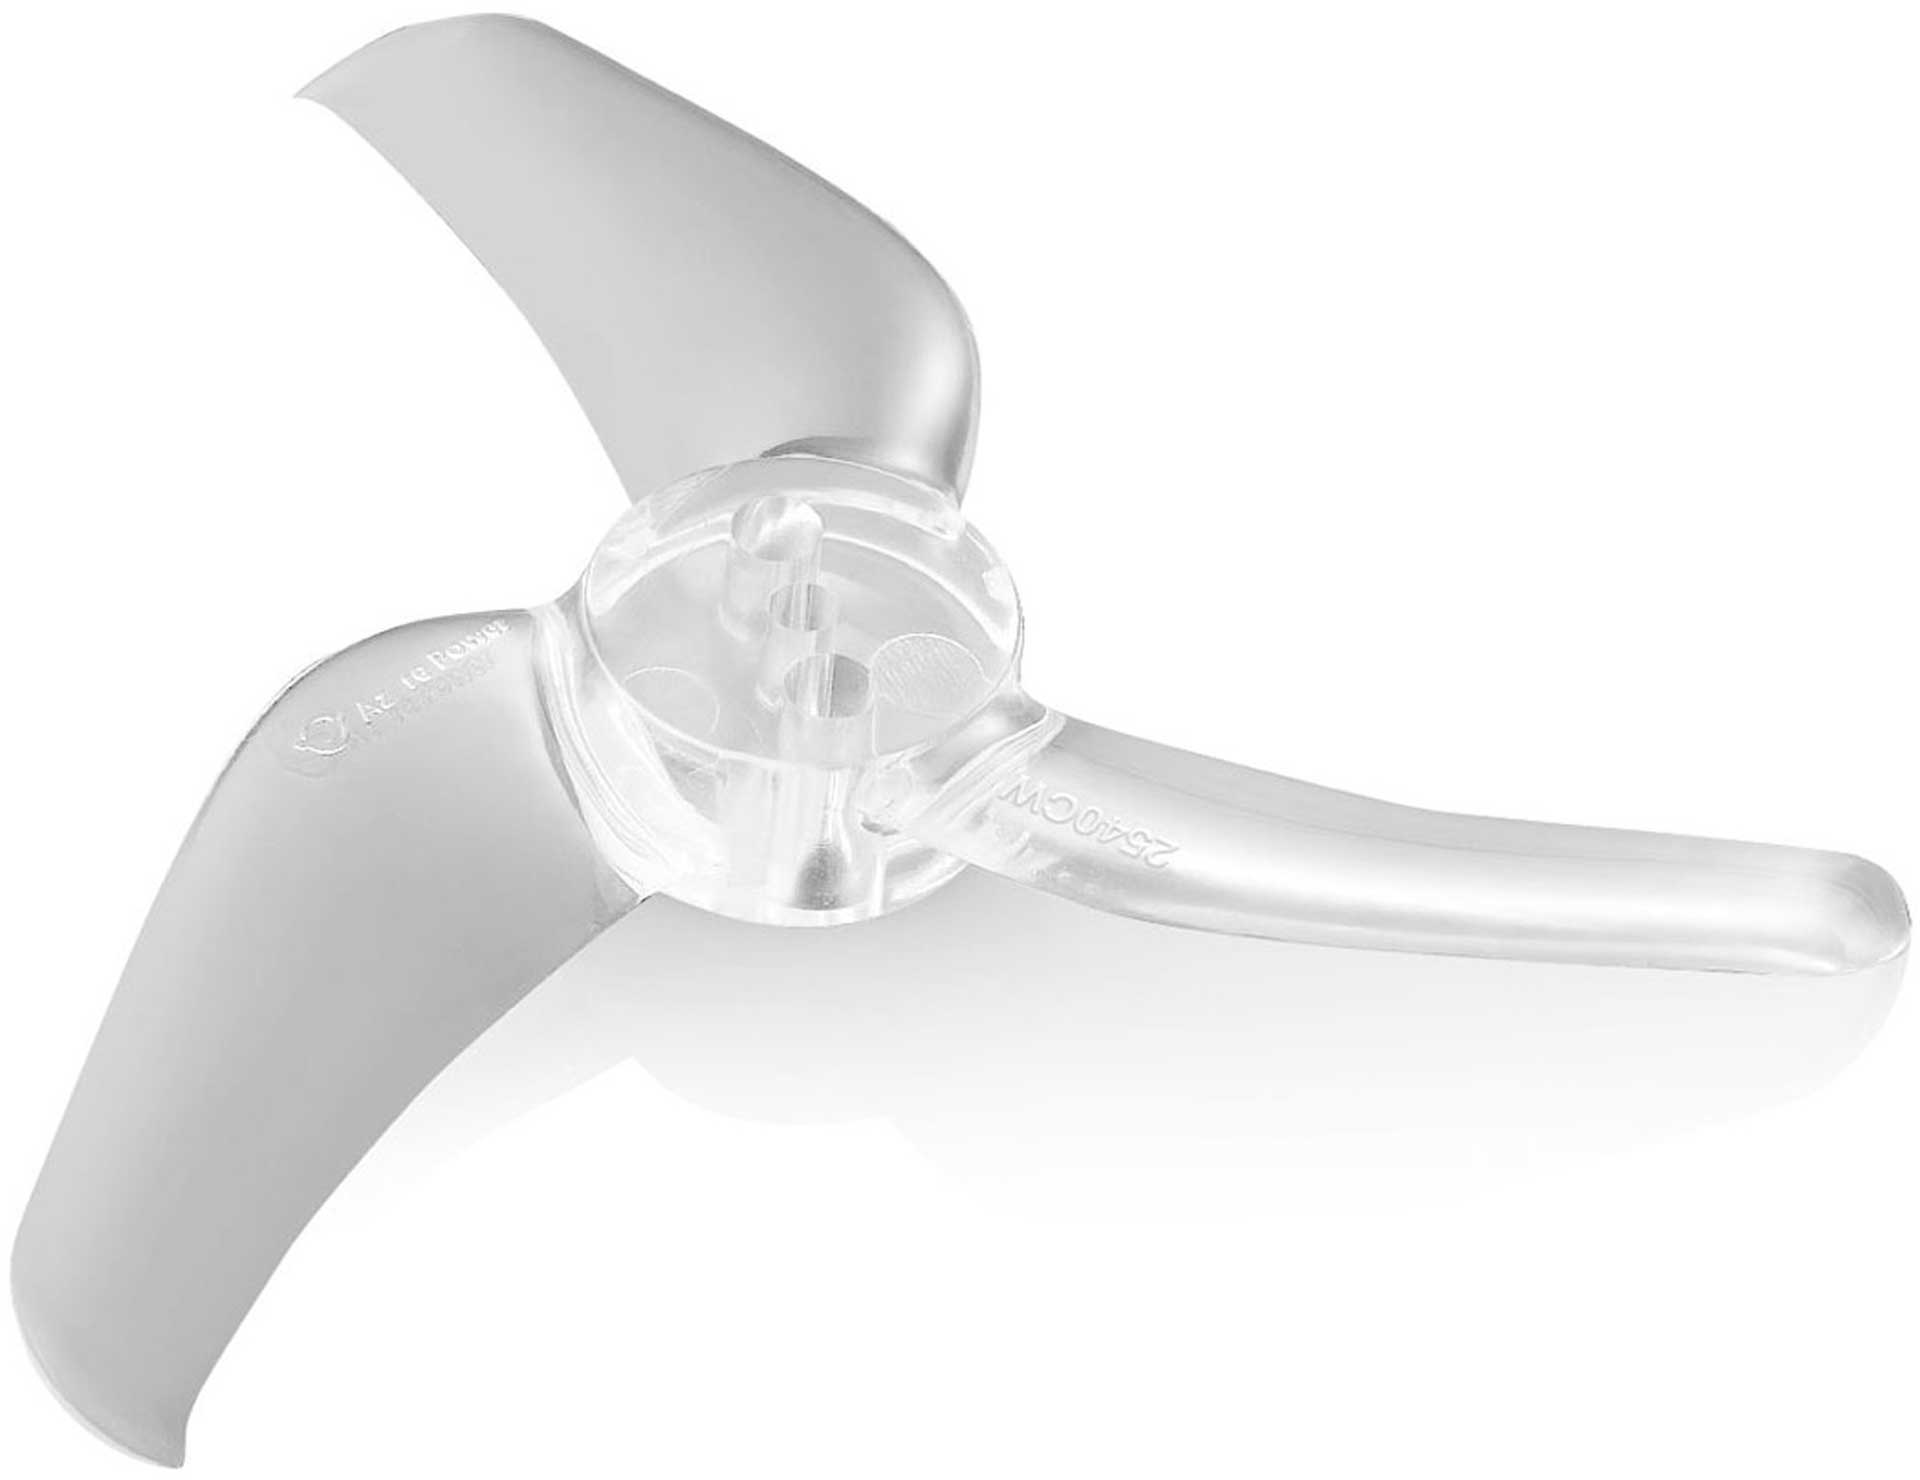 AZURE POWER RACE 3-BLADE 2540 2.5/4 PROPELLER CLEAR 4X RIGHT & 4X LEFT (8PIECES)